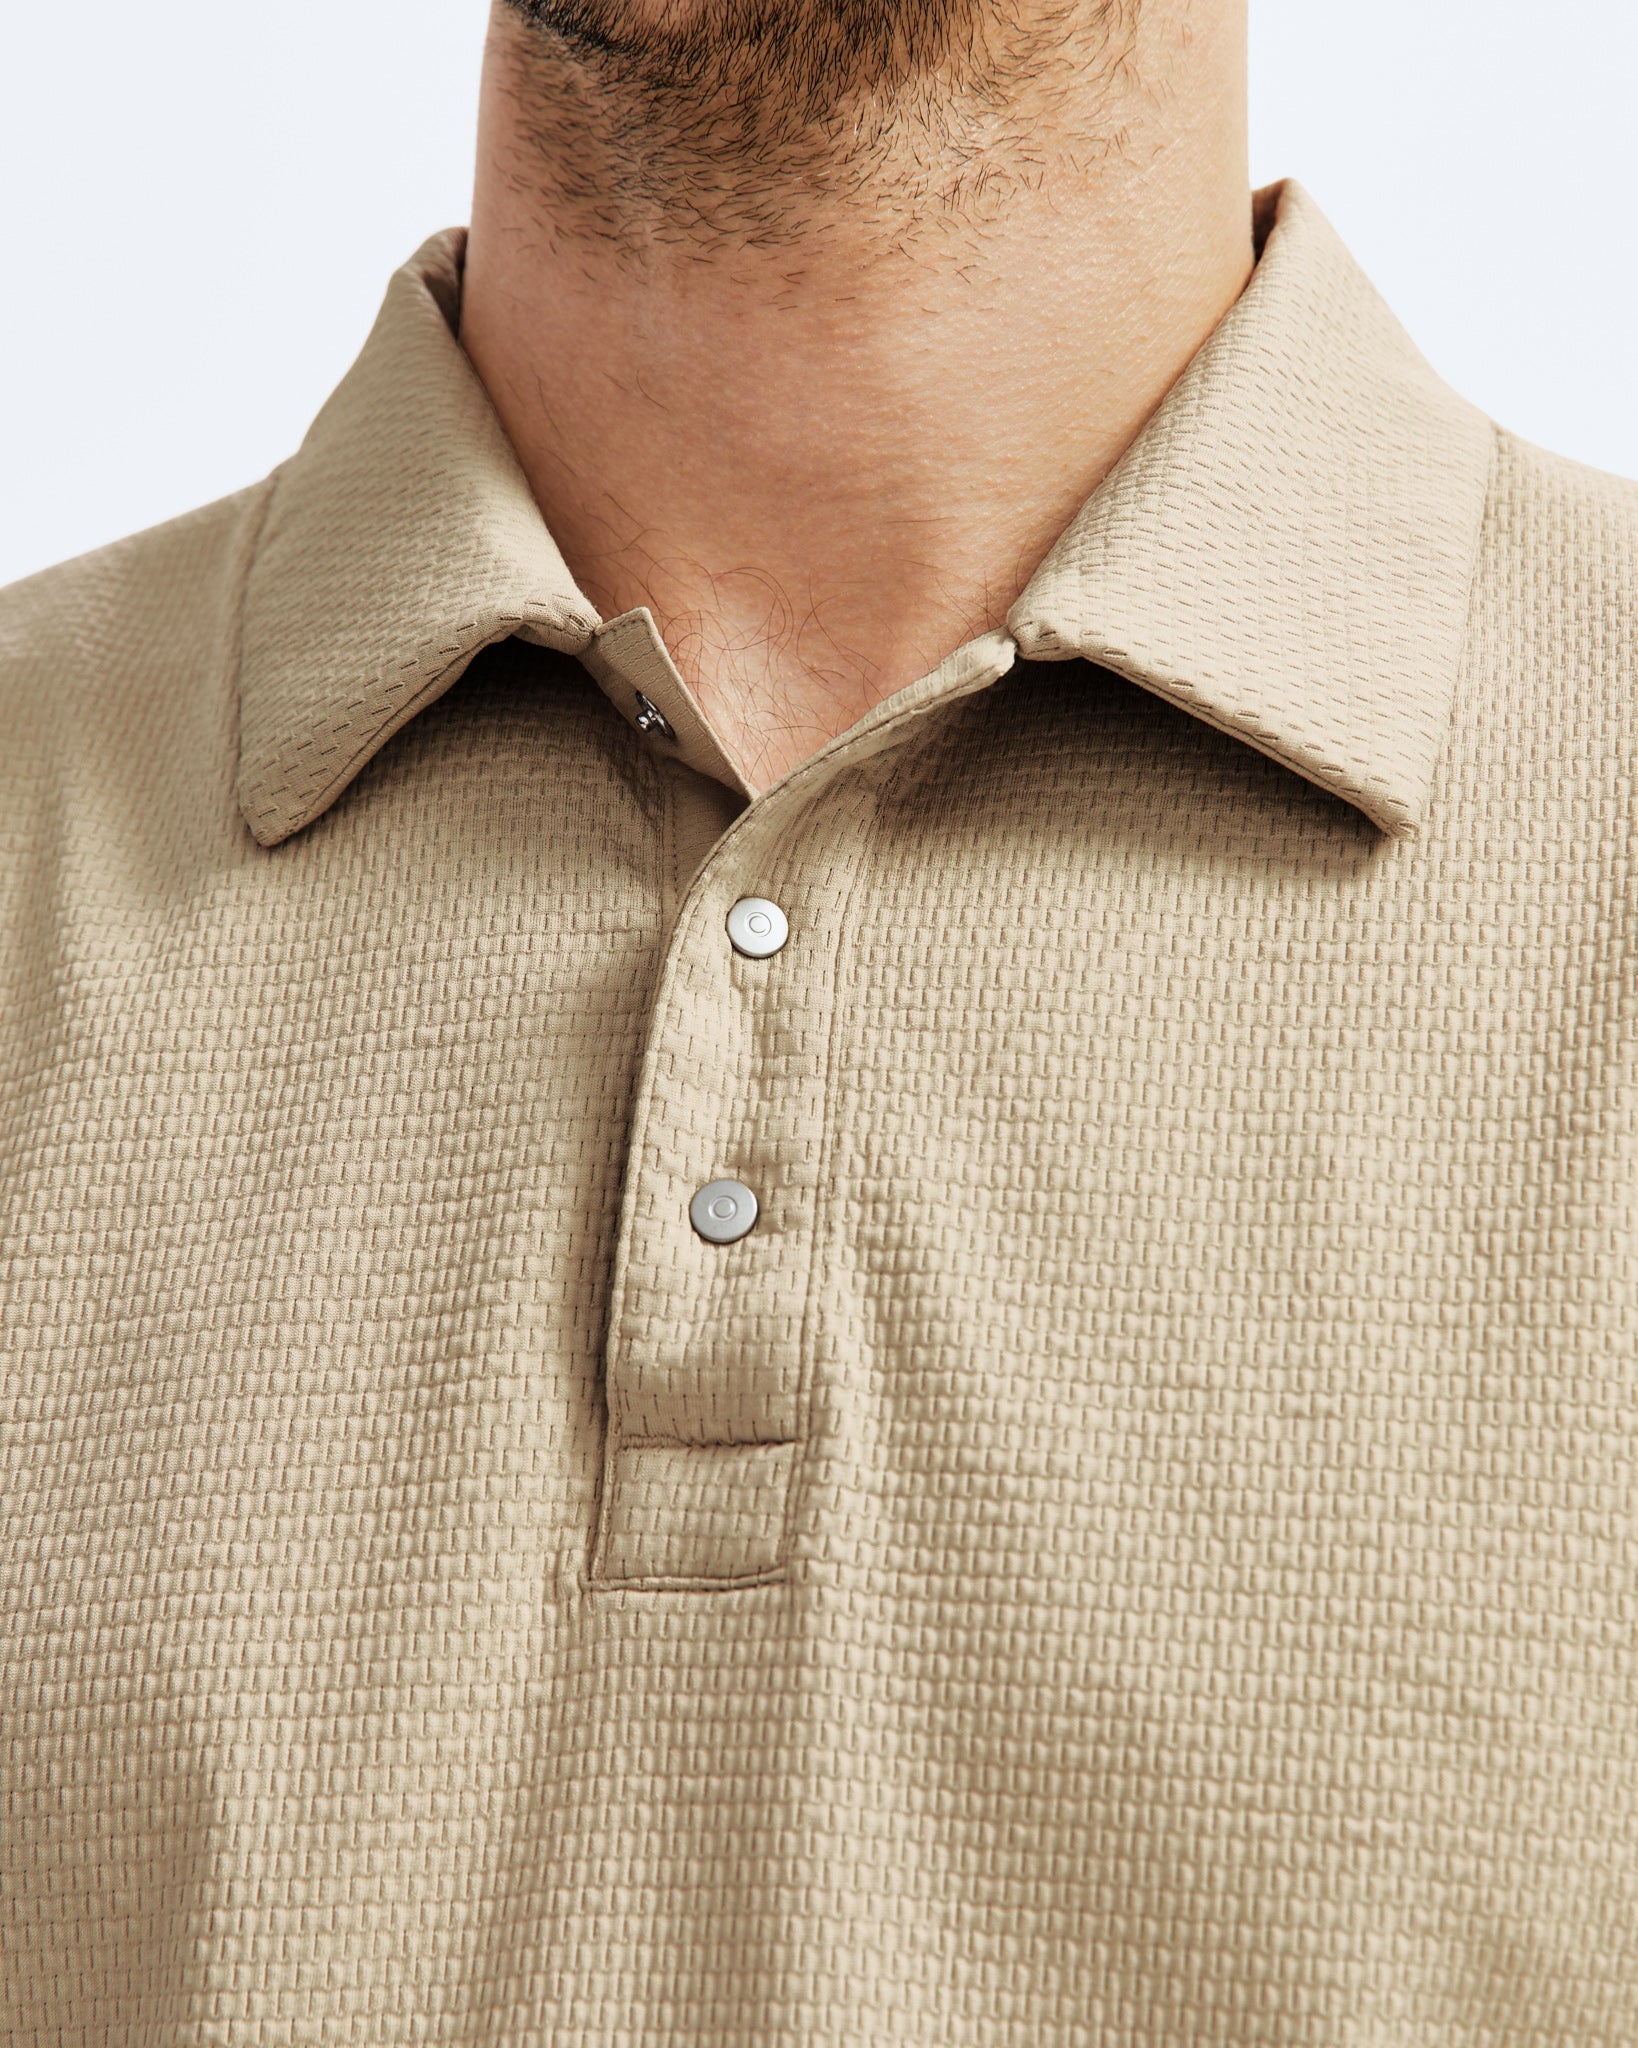 【Reigning Champ】Solotex Mesh Polo | Reigning Champ JP